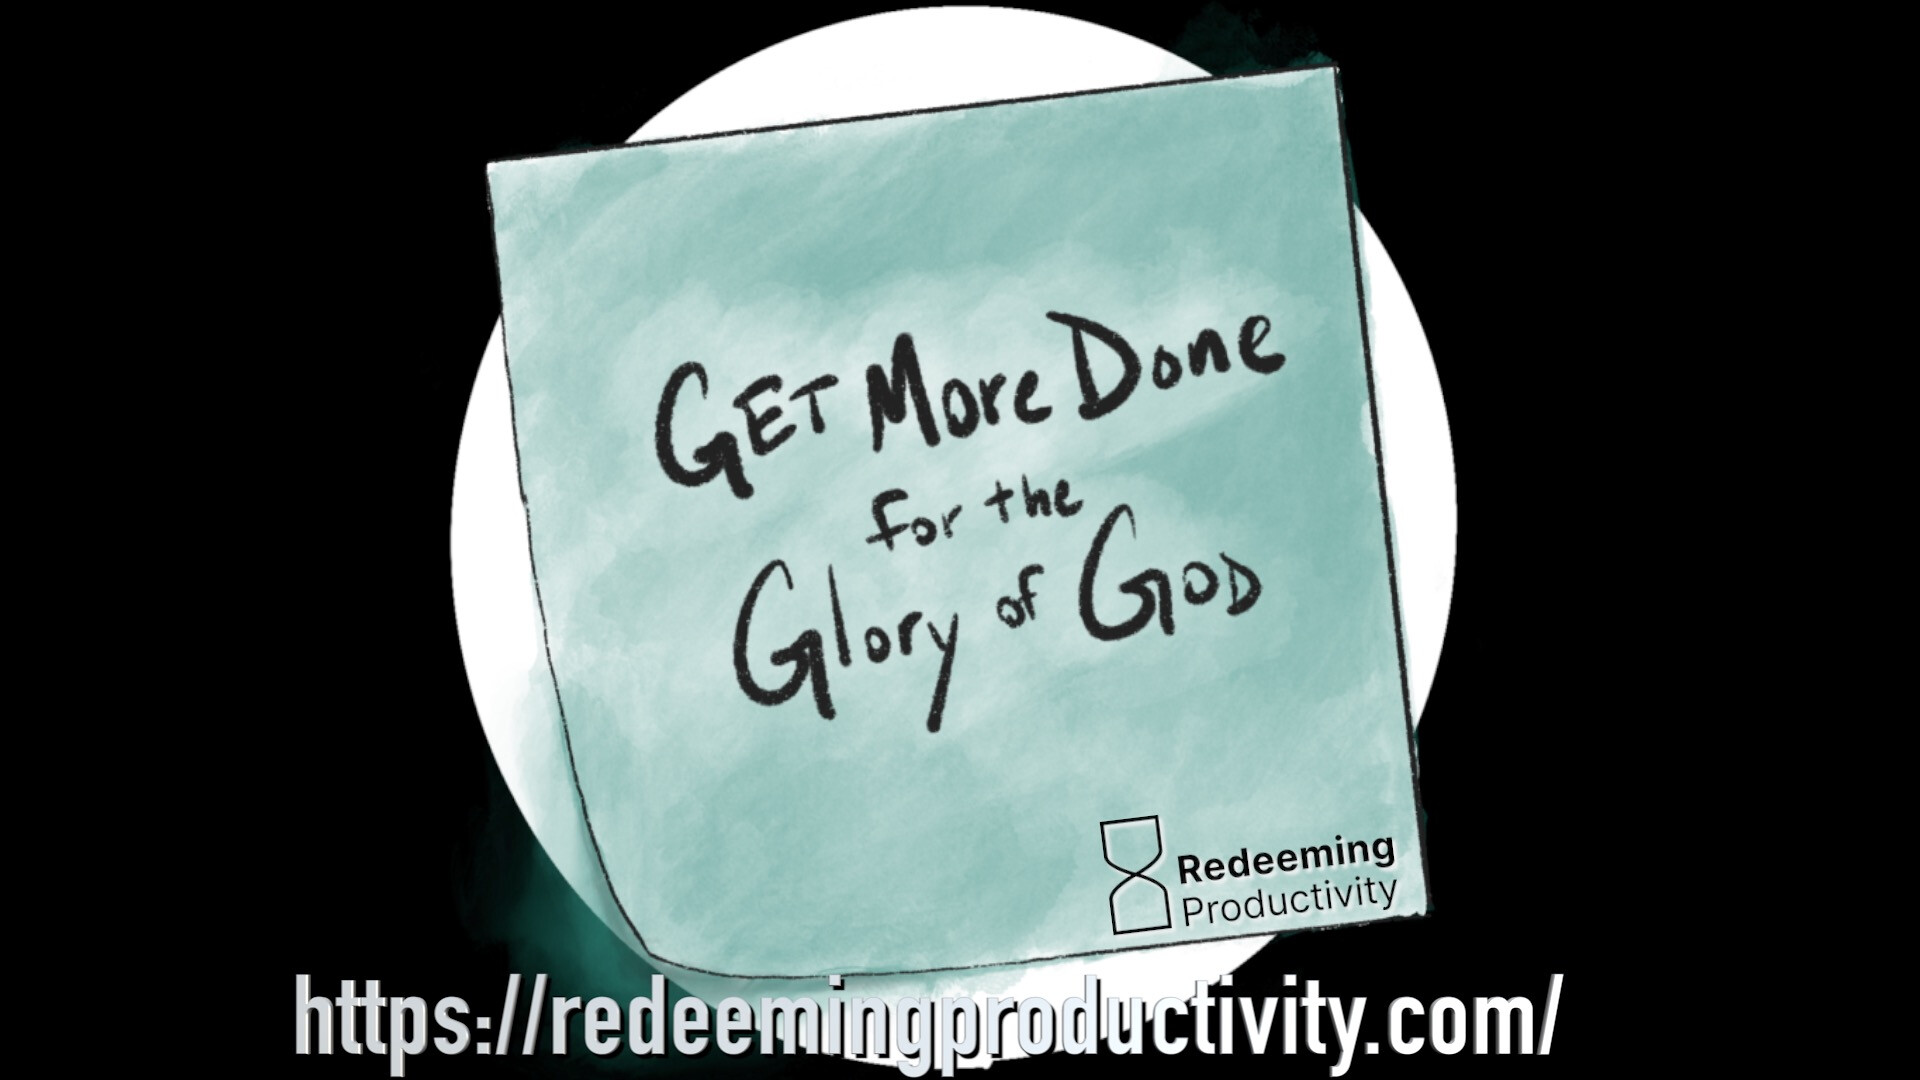 Stewarding your time for God's glory